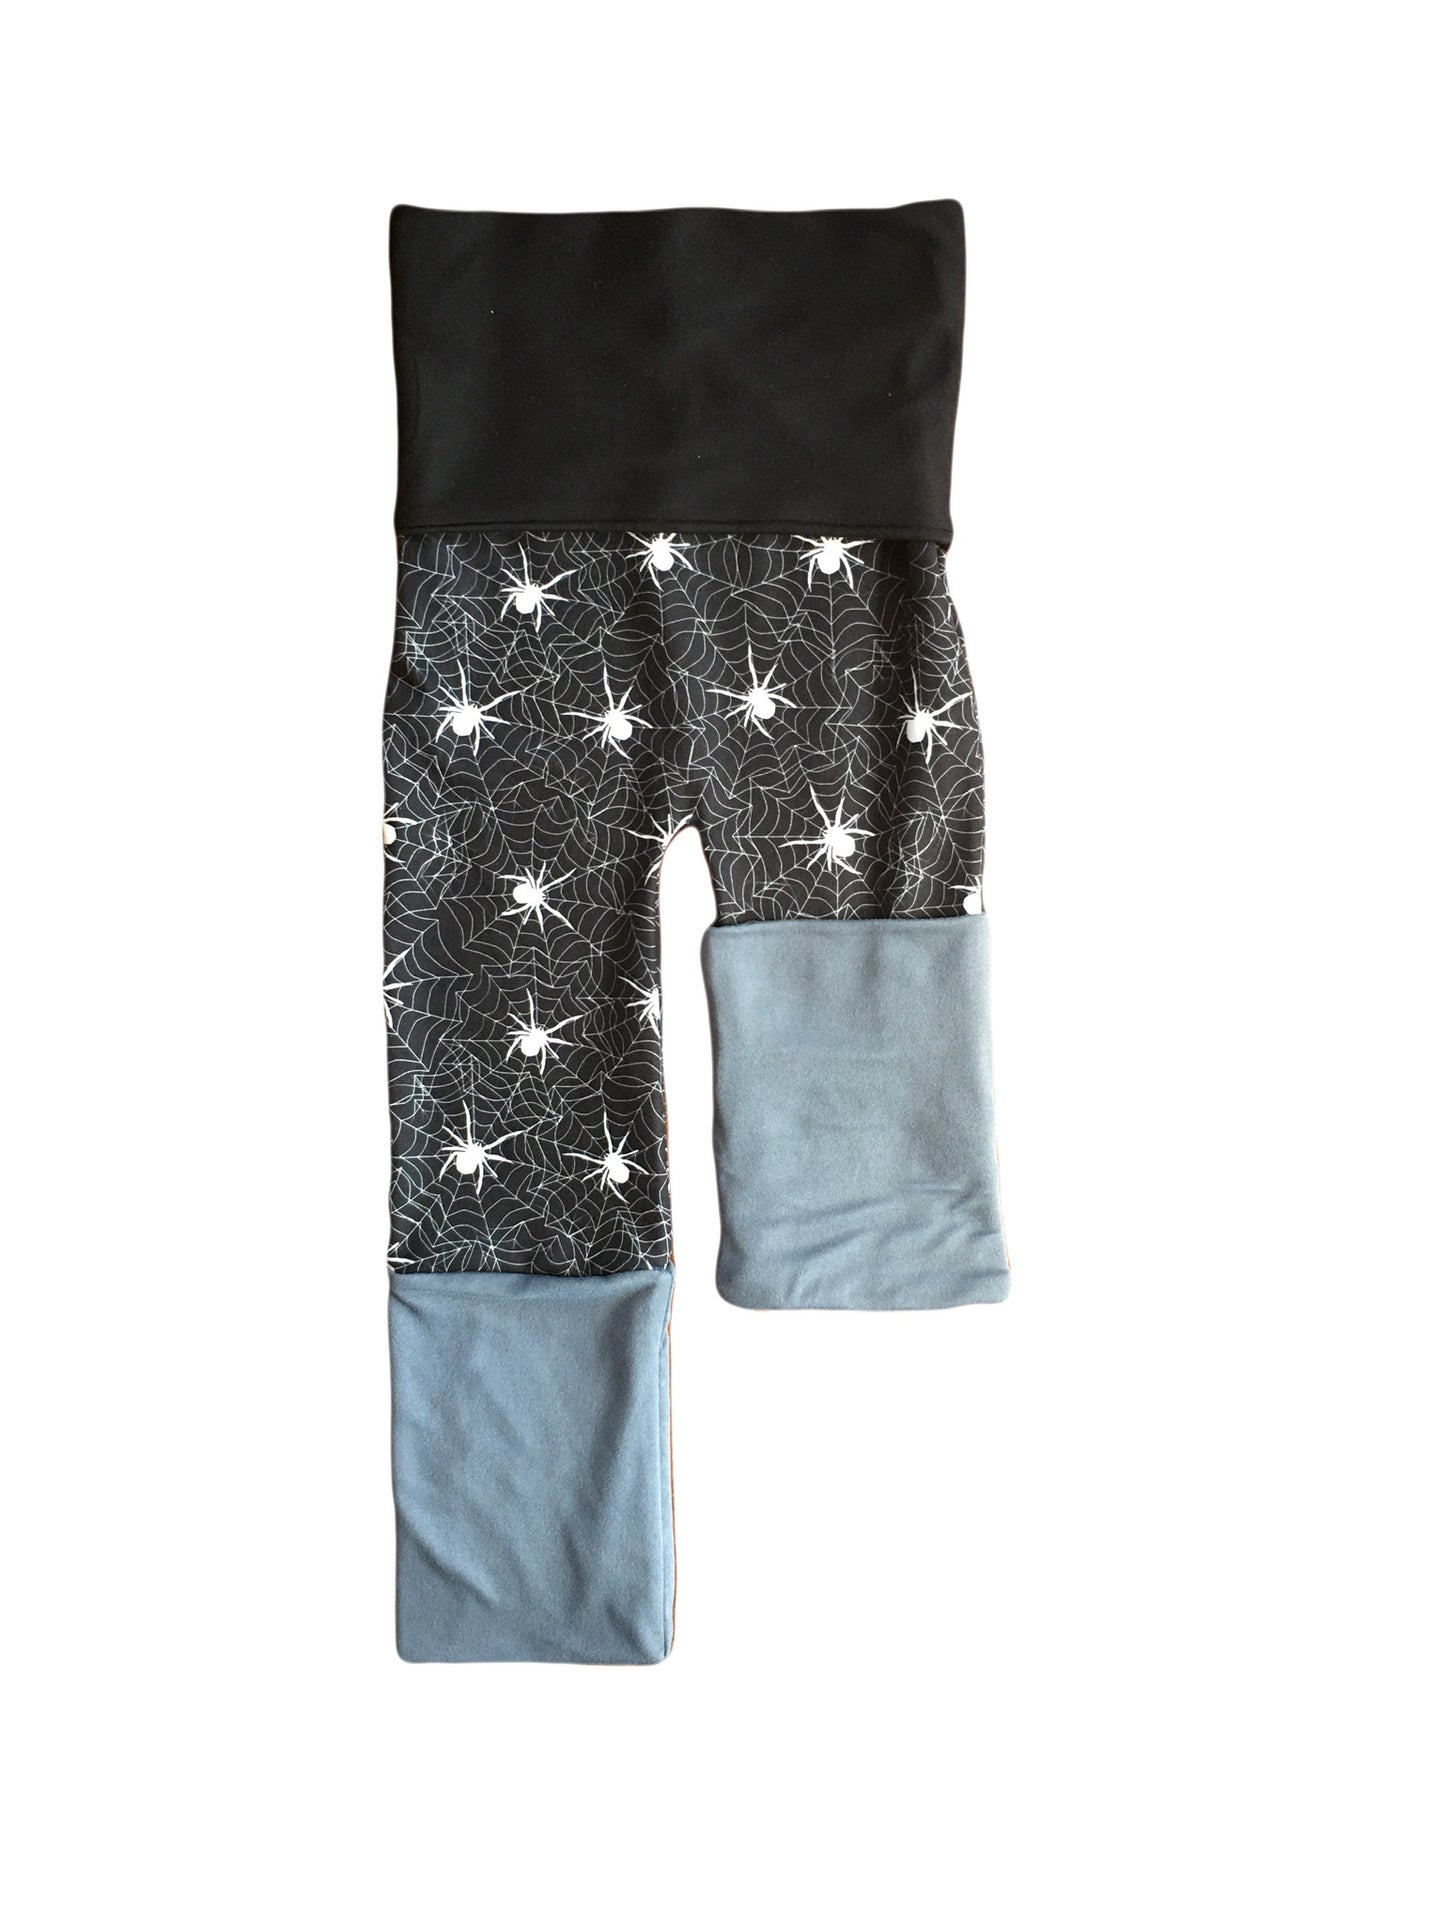 Adjustable Pants - Spiders with Gray & Black